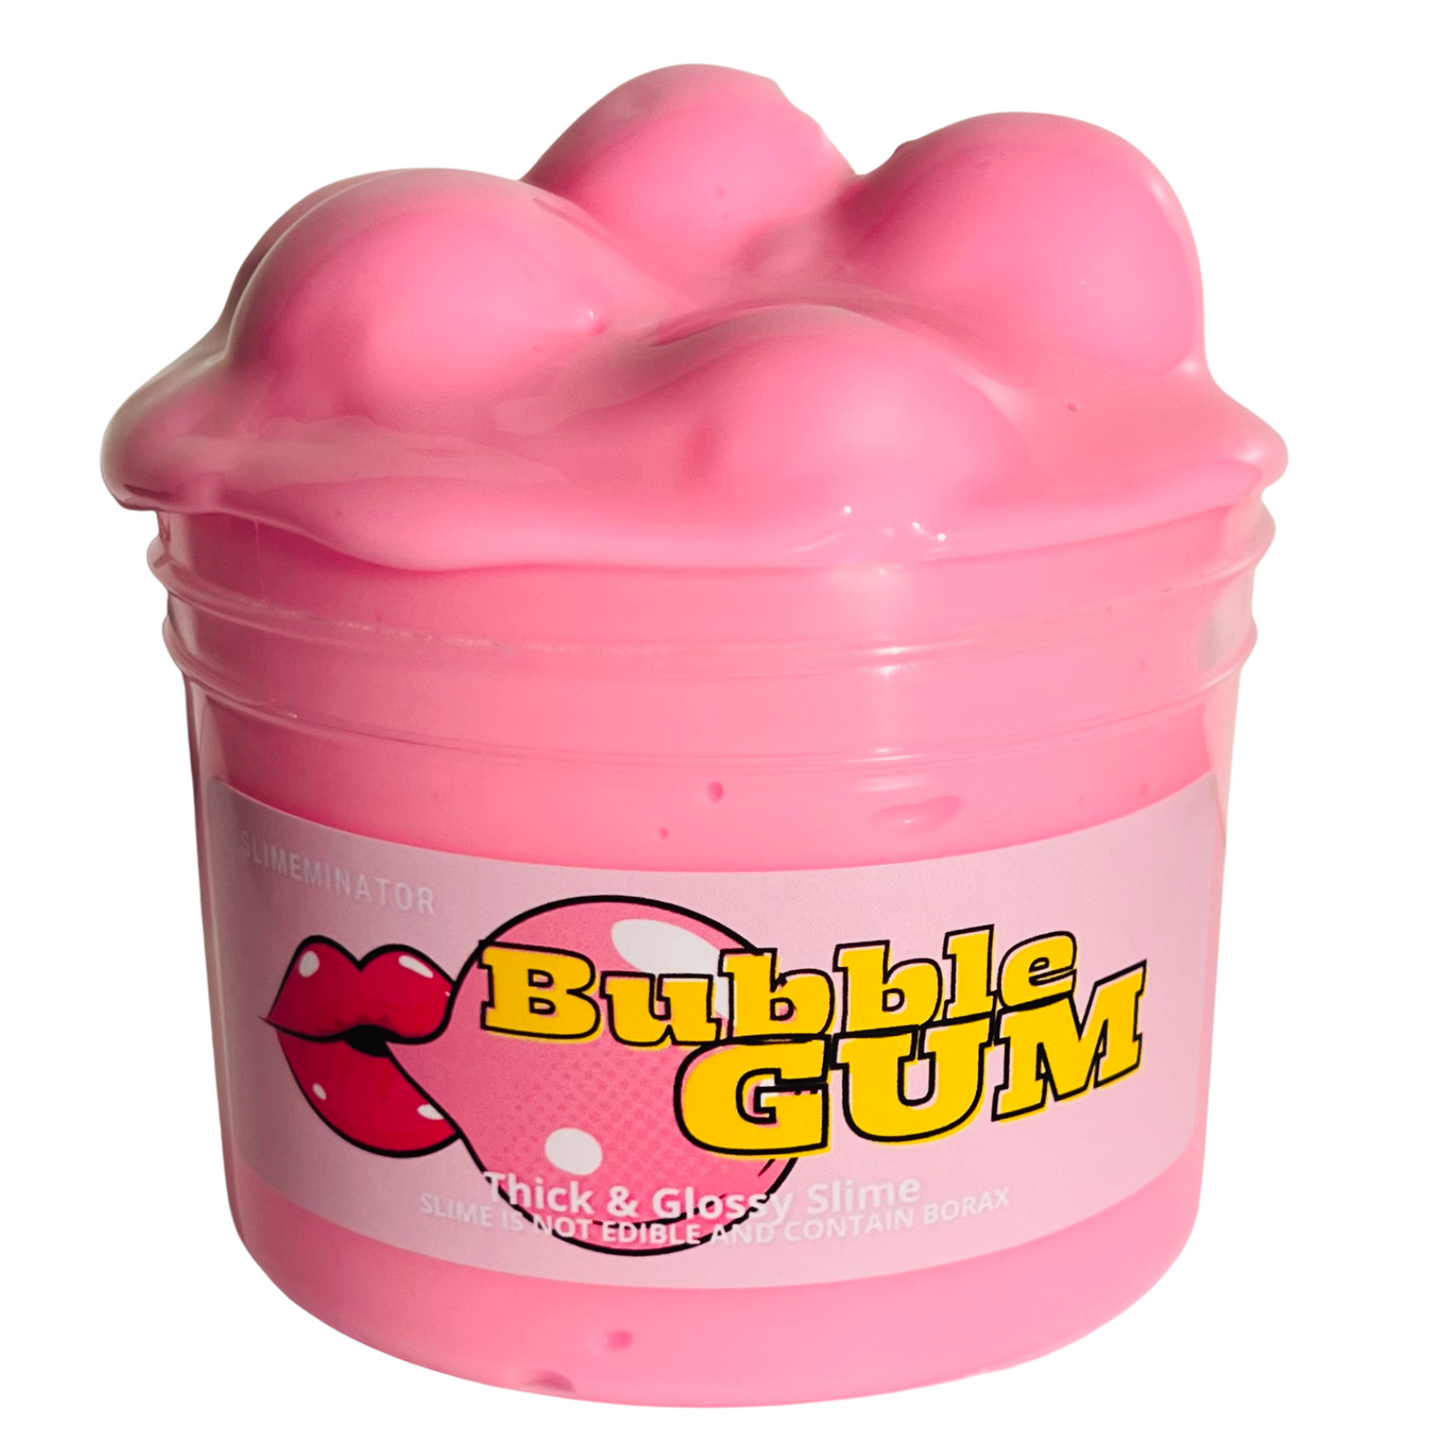 BUBBLE GUM THICK & GLOSSY SLIME